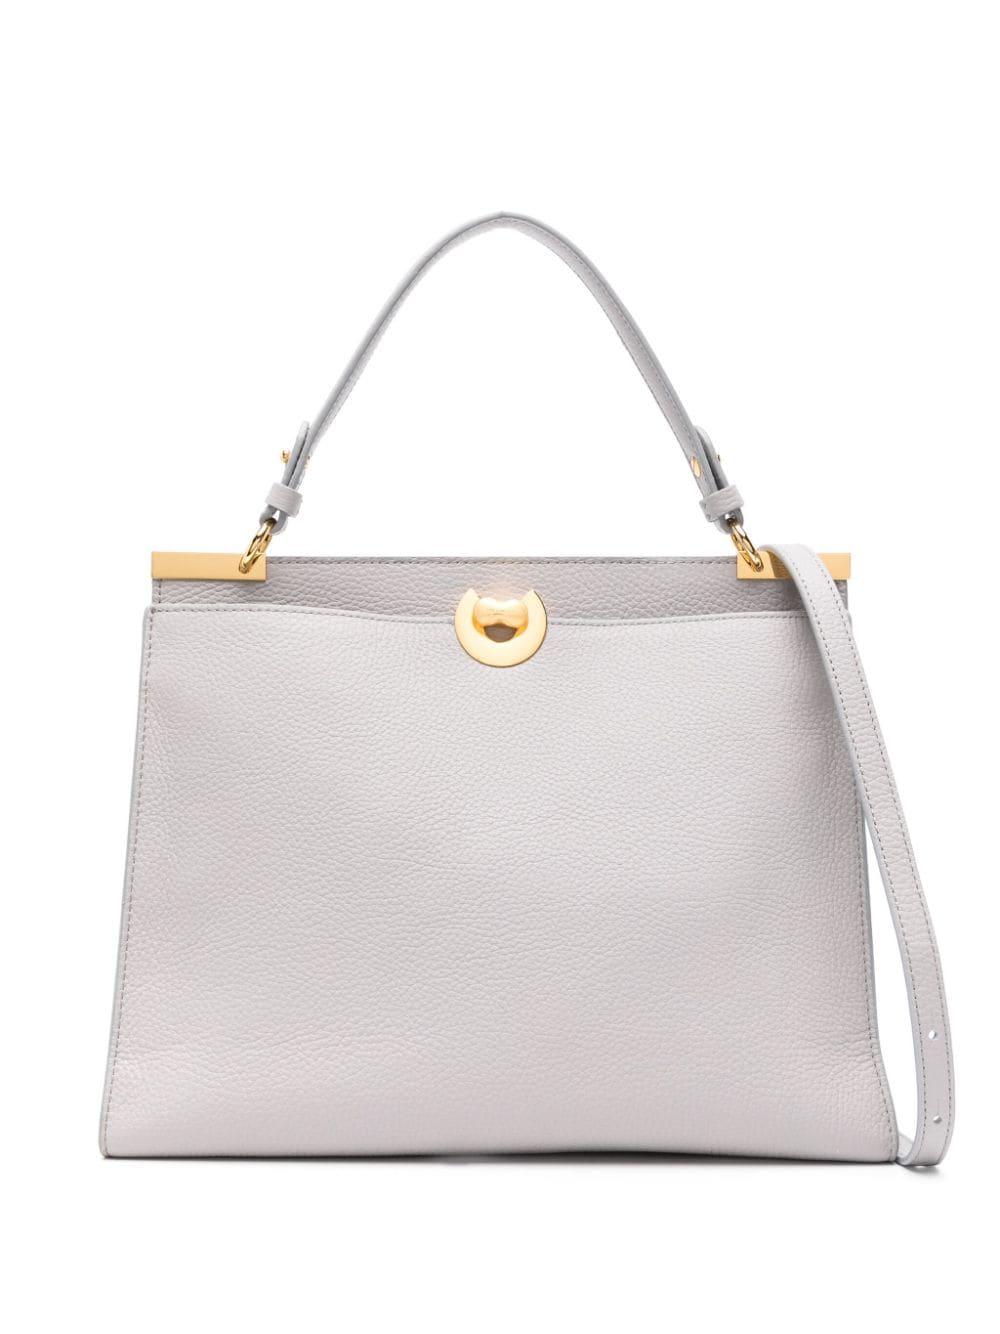 Coccinelle Medium Binxie Leather Tote Bag In Grey